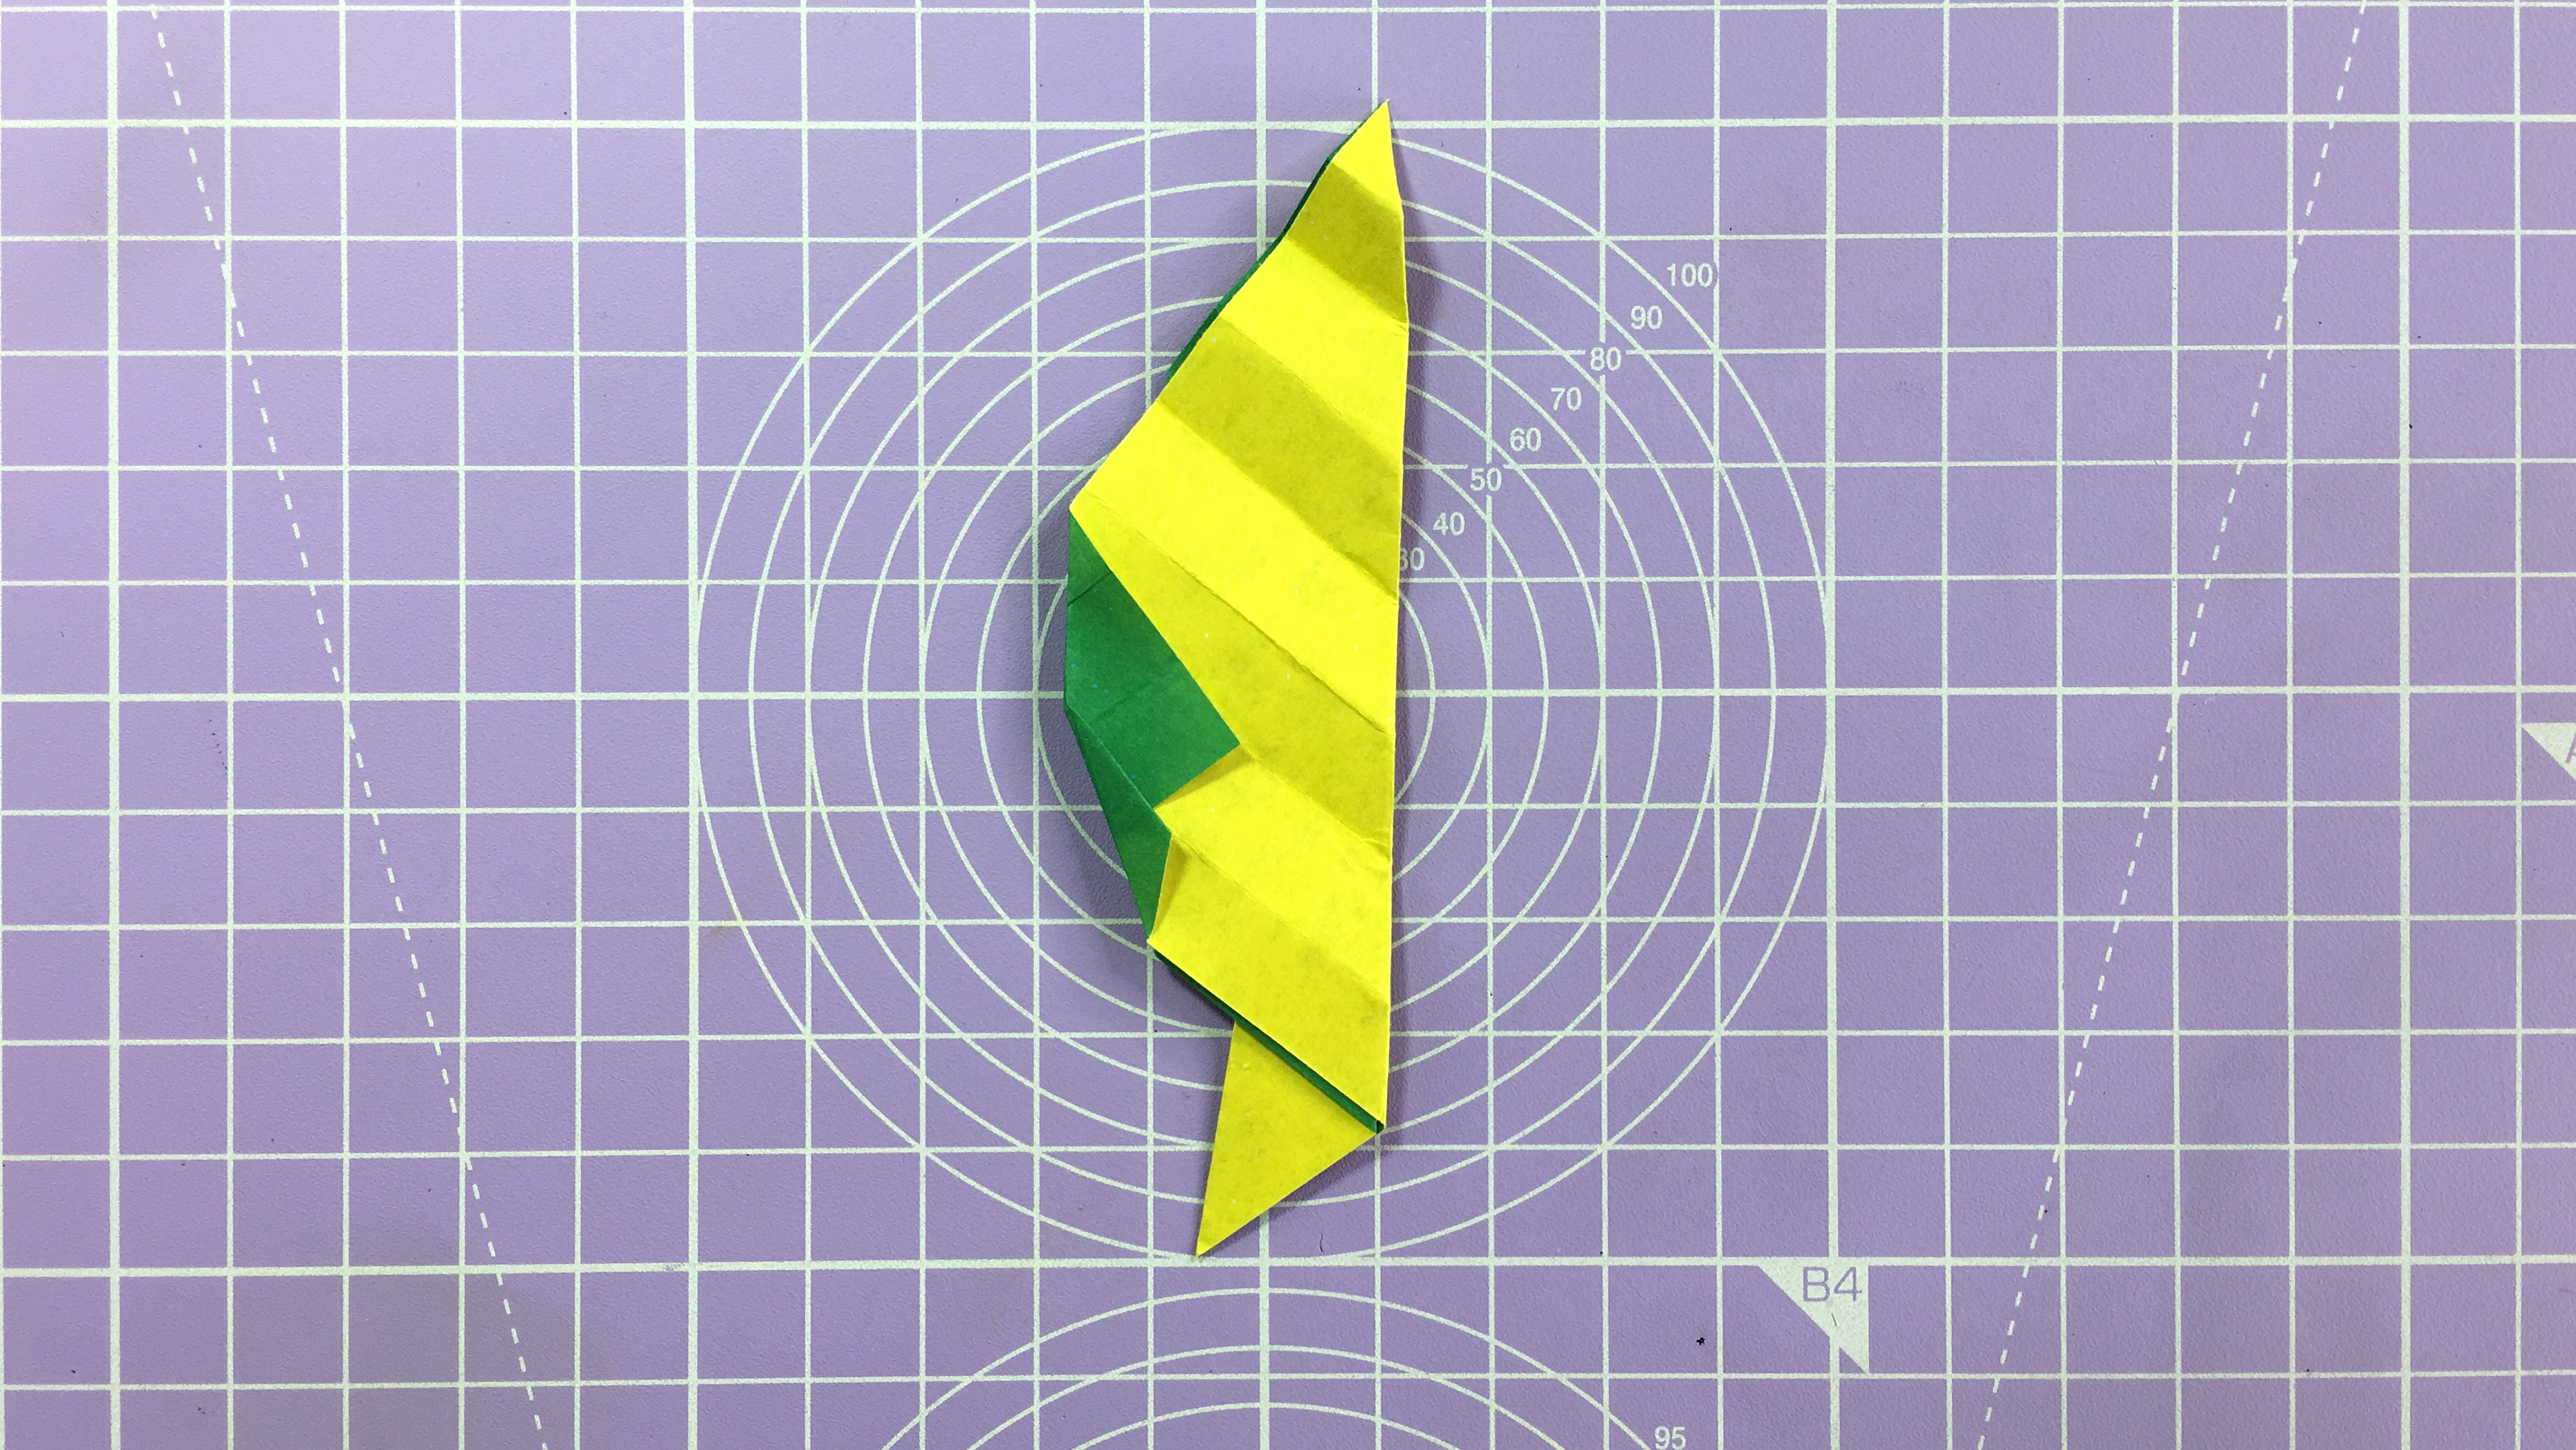 How to make an easy origami leaf - step 14c